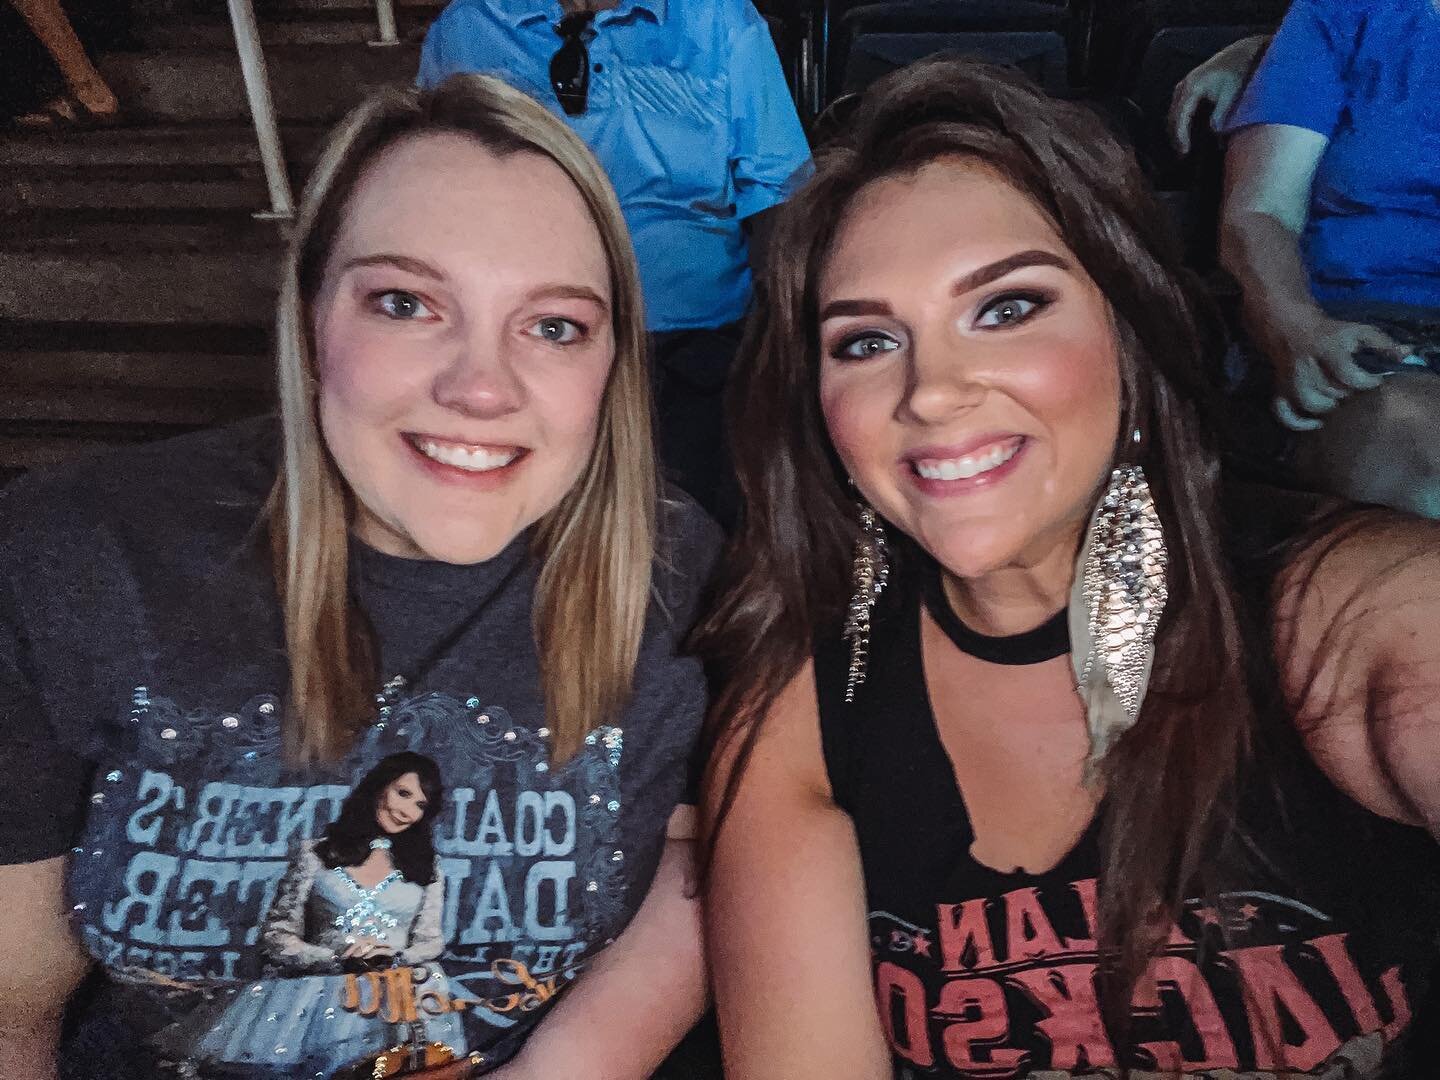 Sister sister 🎵

Excited to see my man Alan Jackson tonight in Knoxville! So far this year I&rsquo;ve seen my queen Reba and my king Alan Jackson. My life is pretty complete!

#countrymusic #alanjackson #tour #country #photography #singersongwriter 